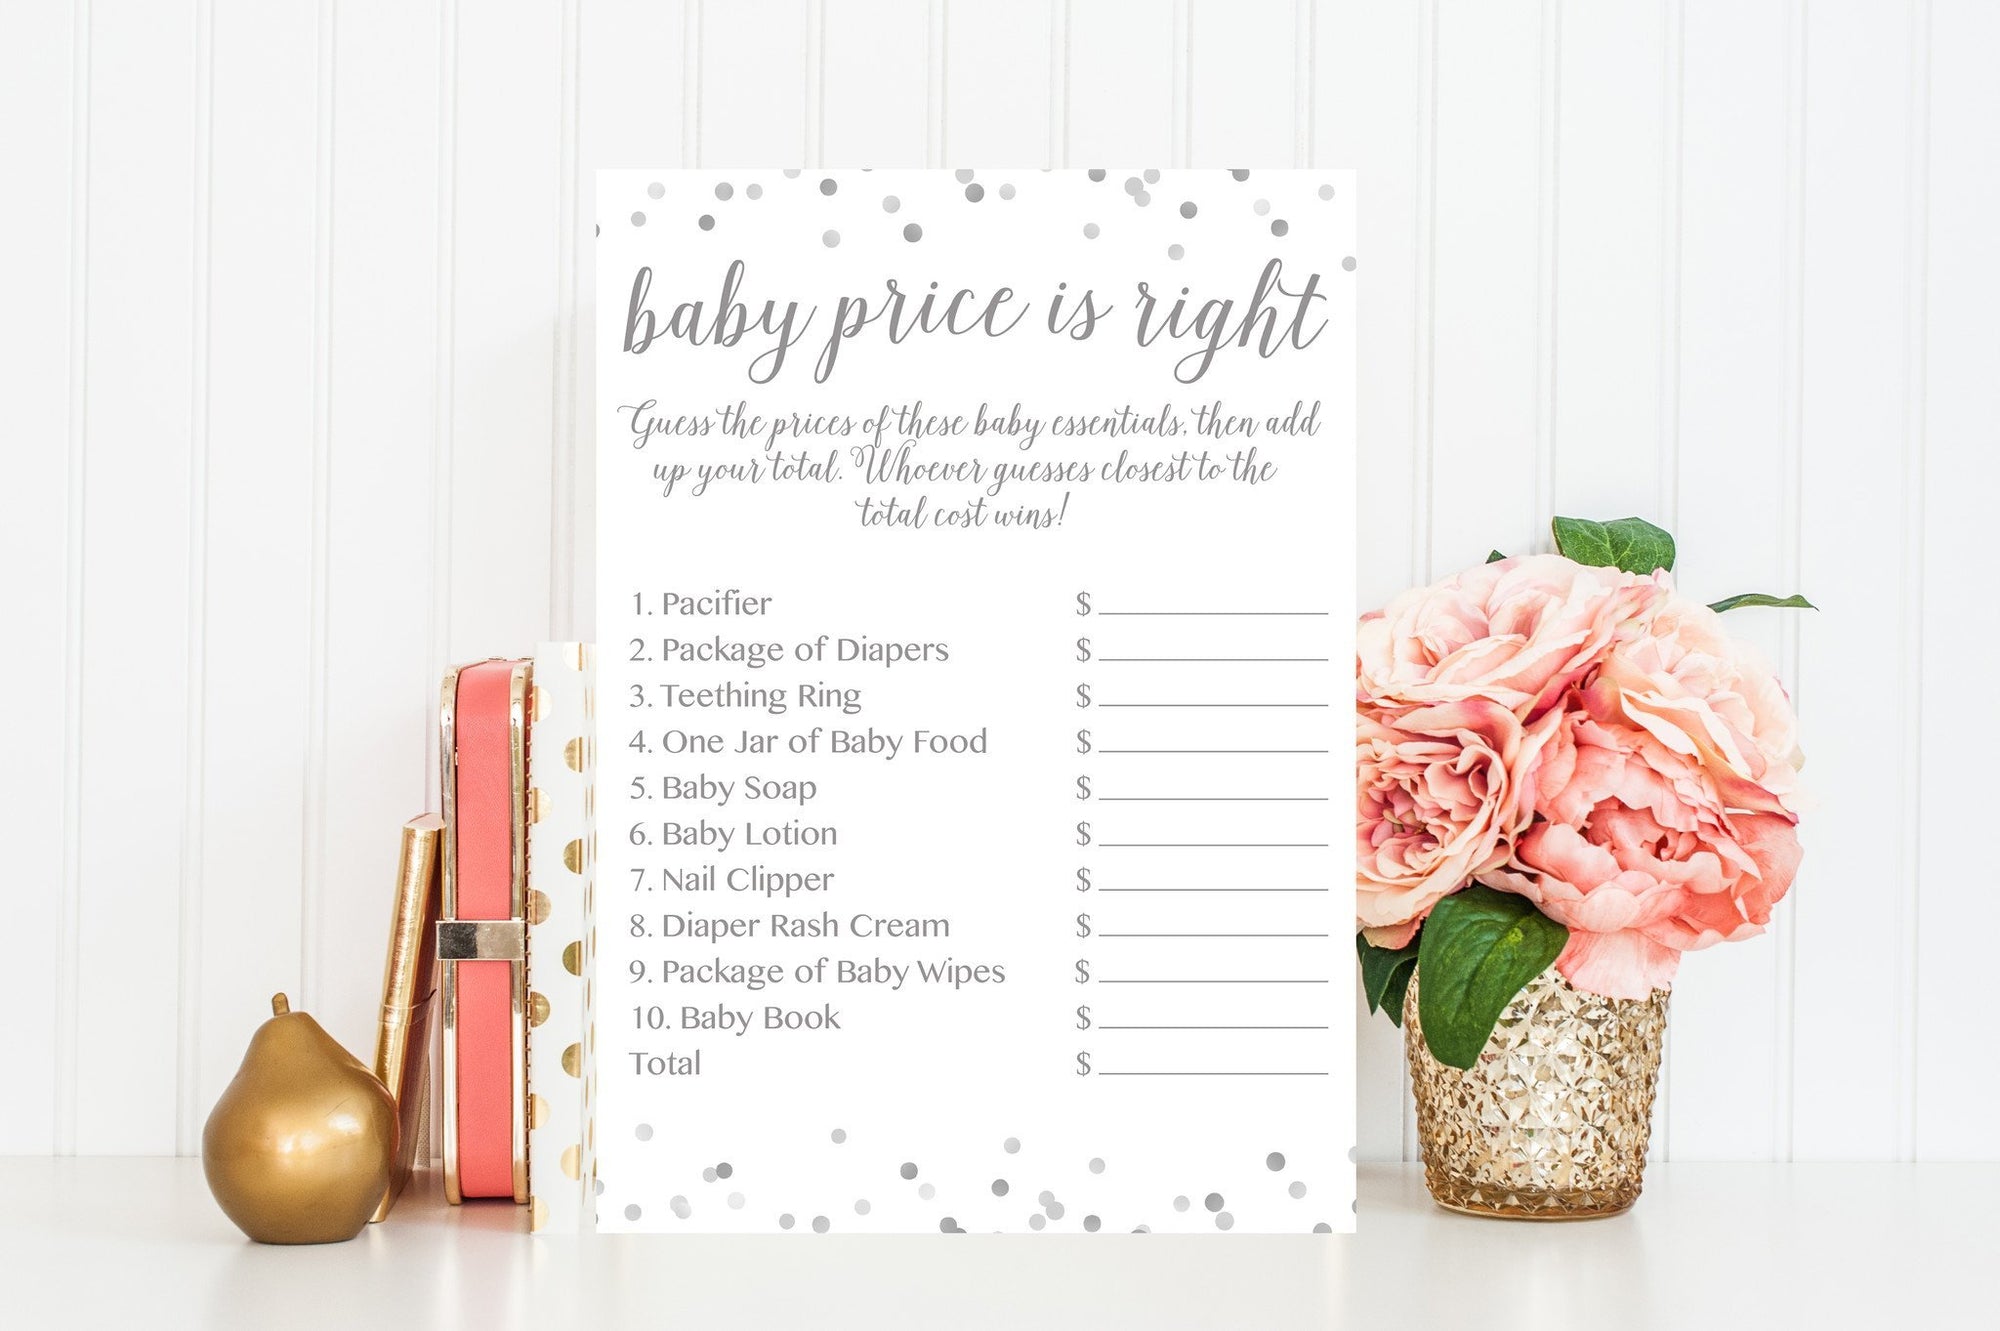 Baby Price Is Right - Grey Confetti Printable - Pretty Collected